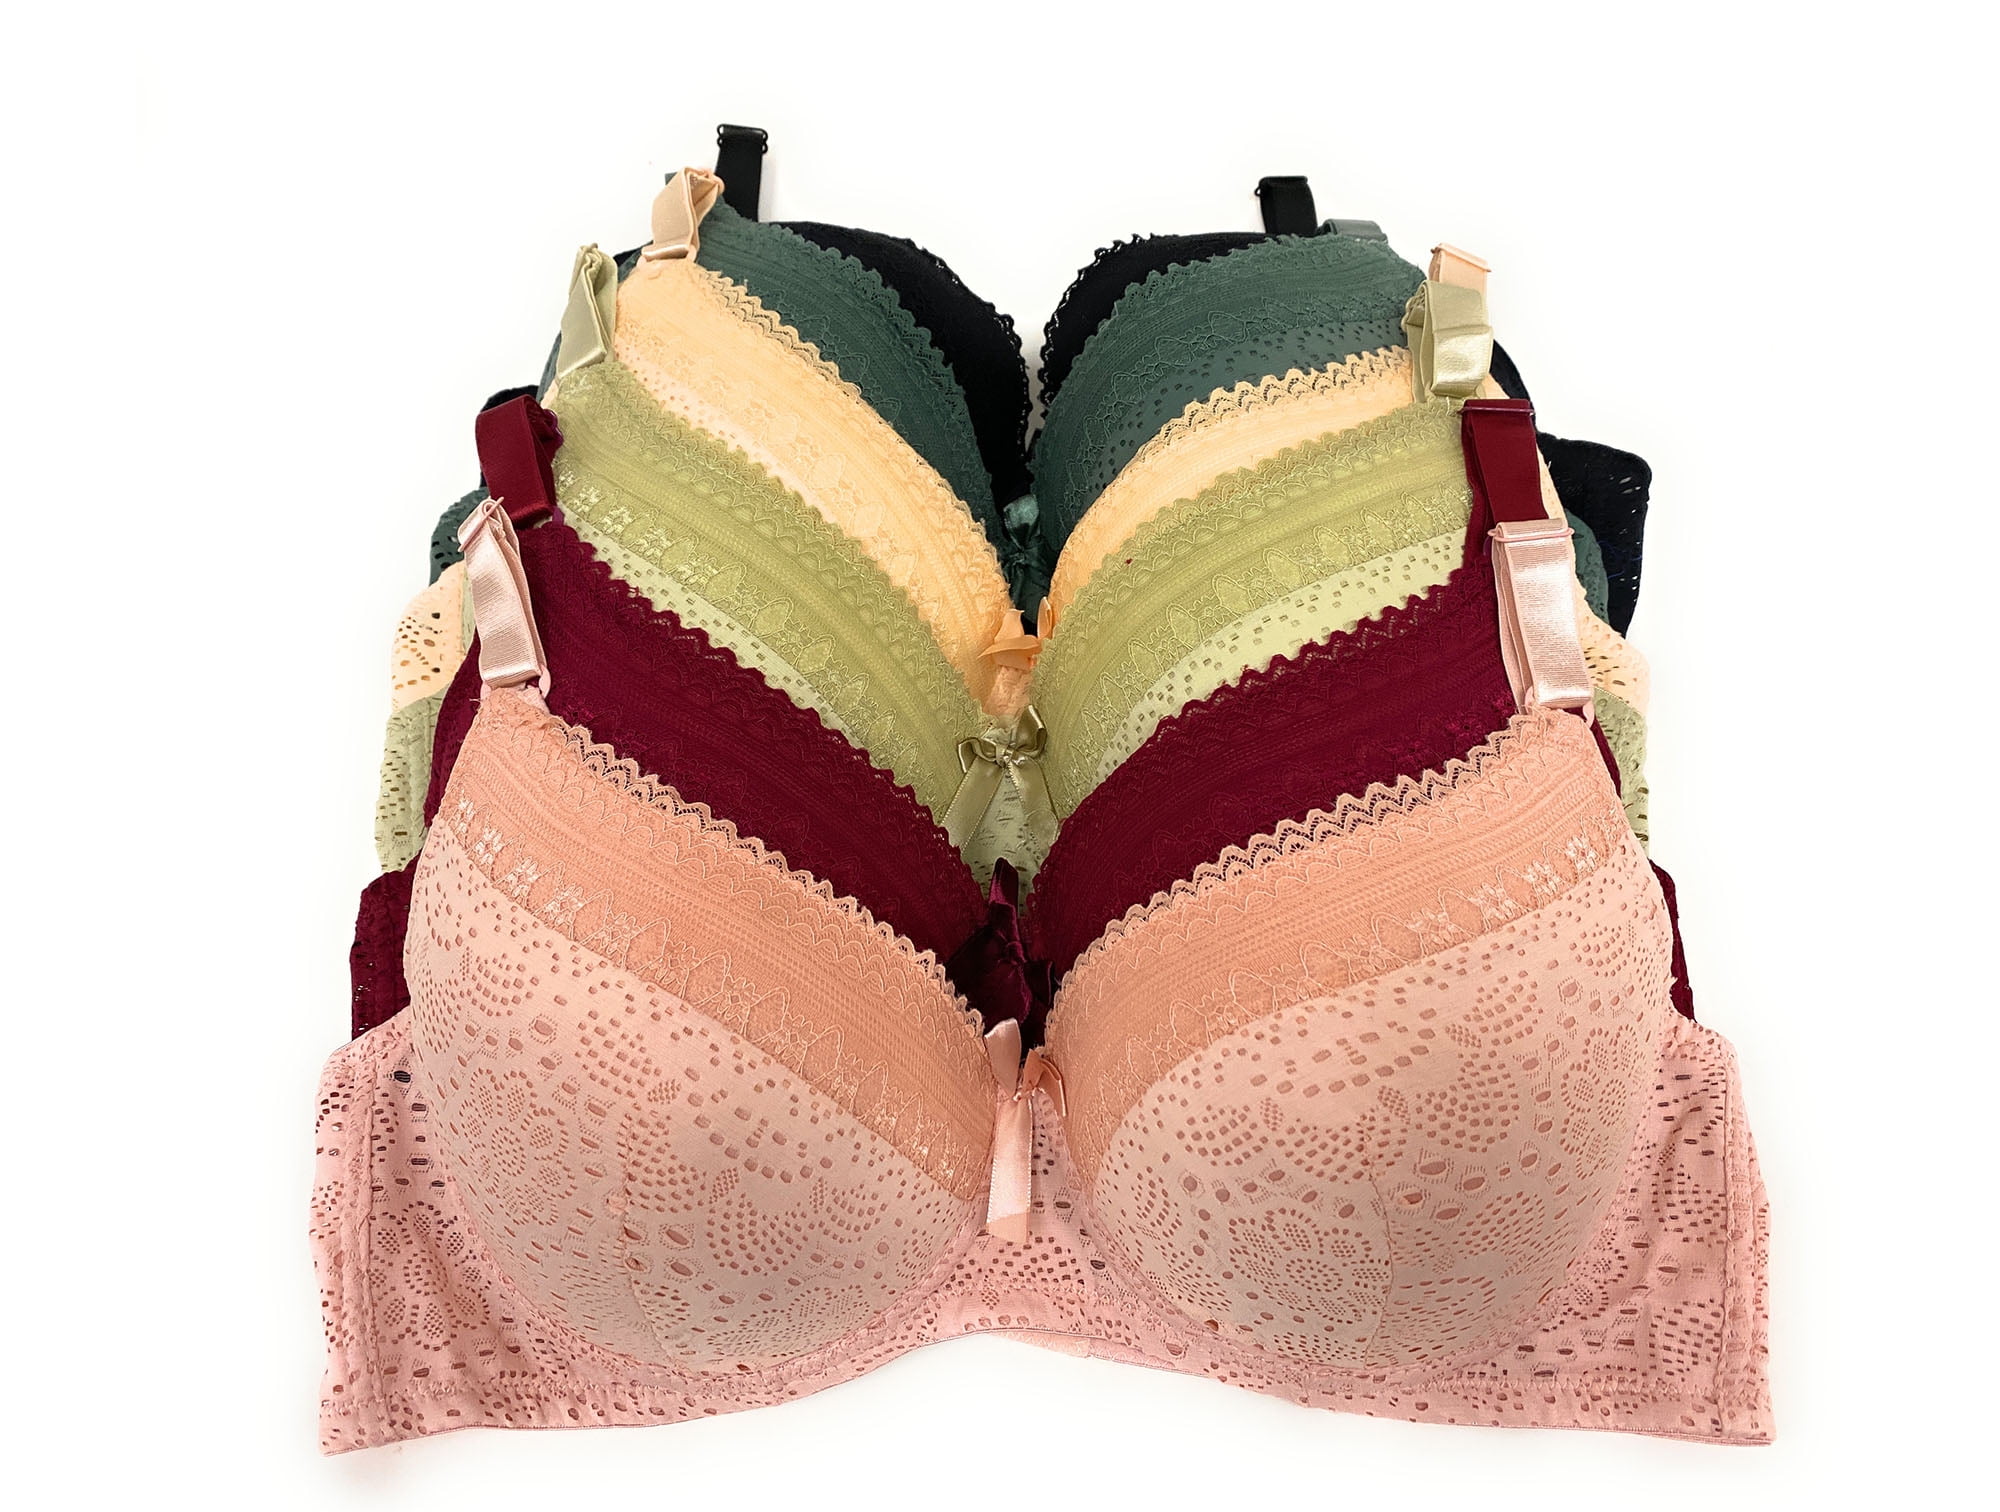 Women Bras 6 Pack of Bra D cup DD cup DDD cup Size 42D (F8203) 